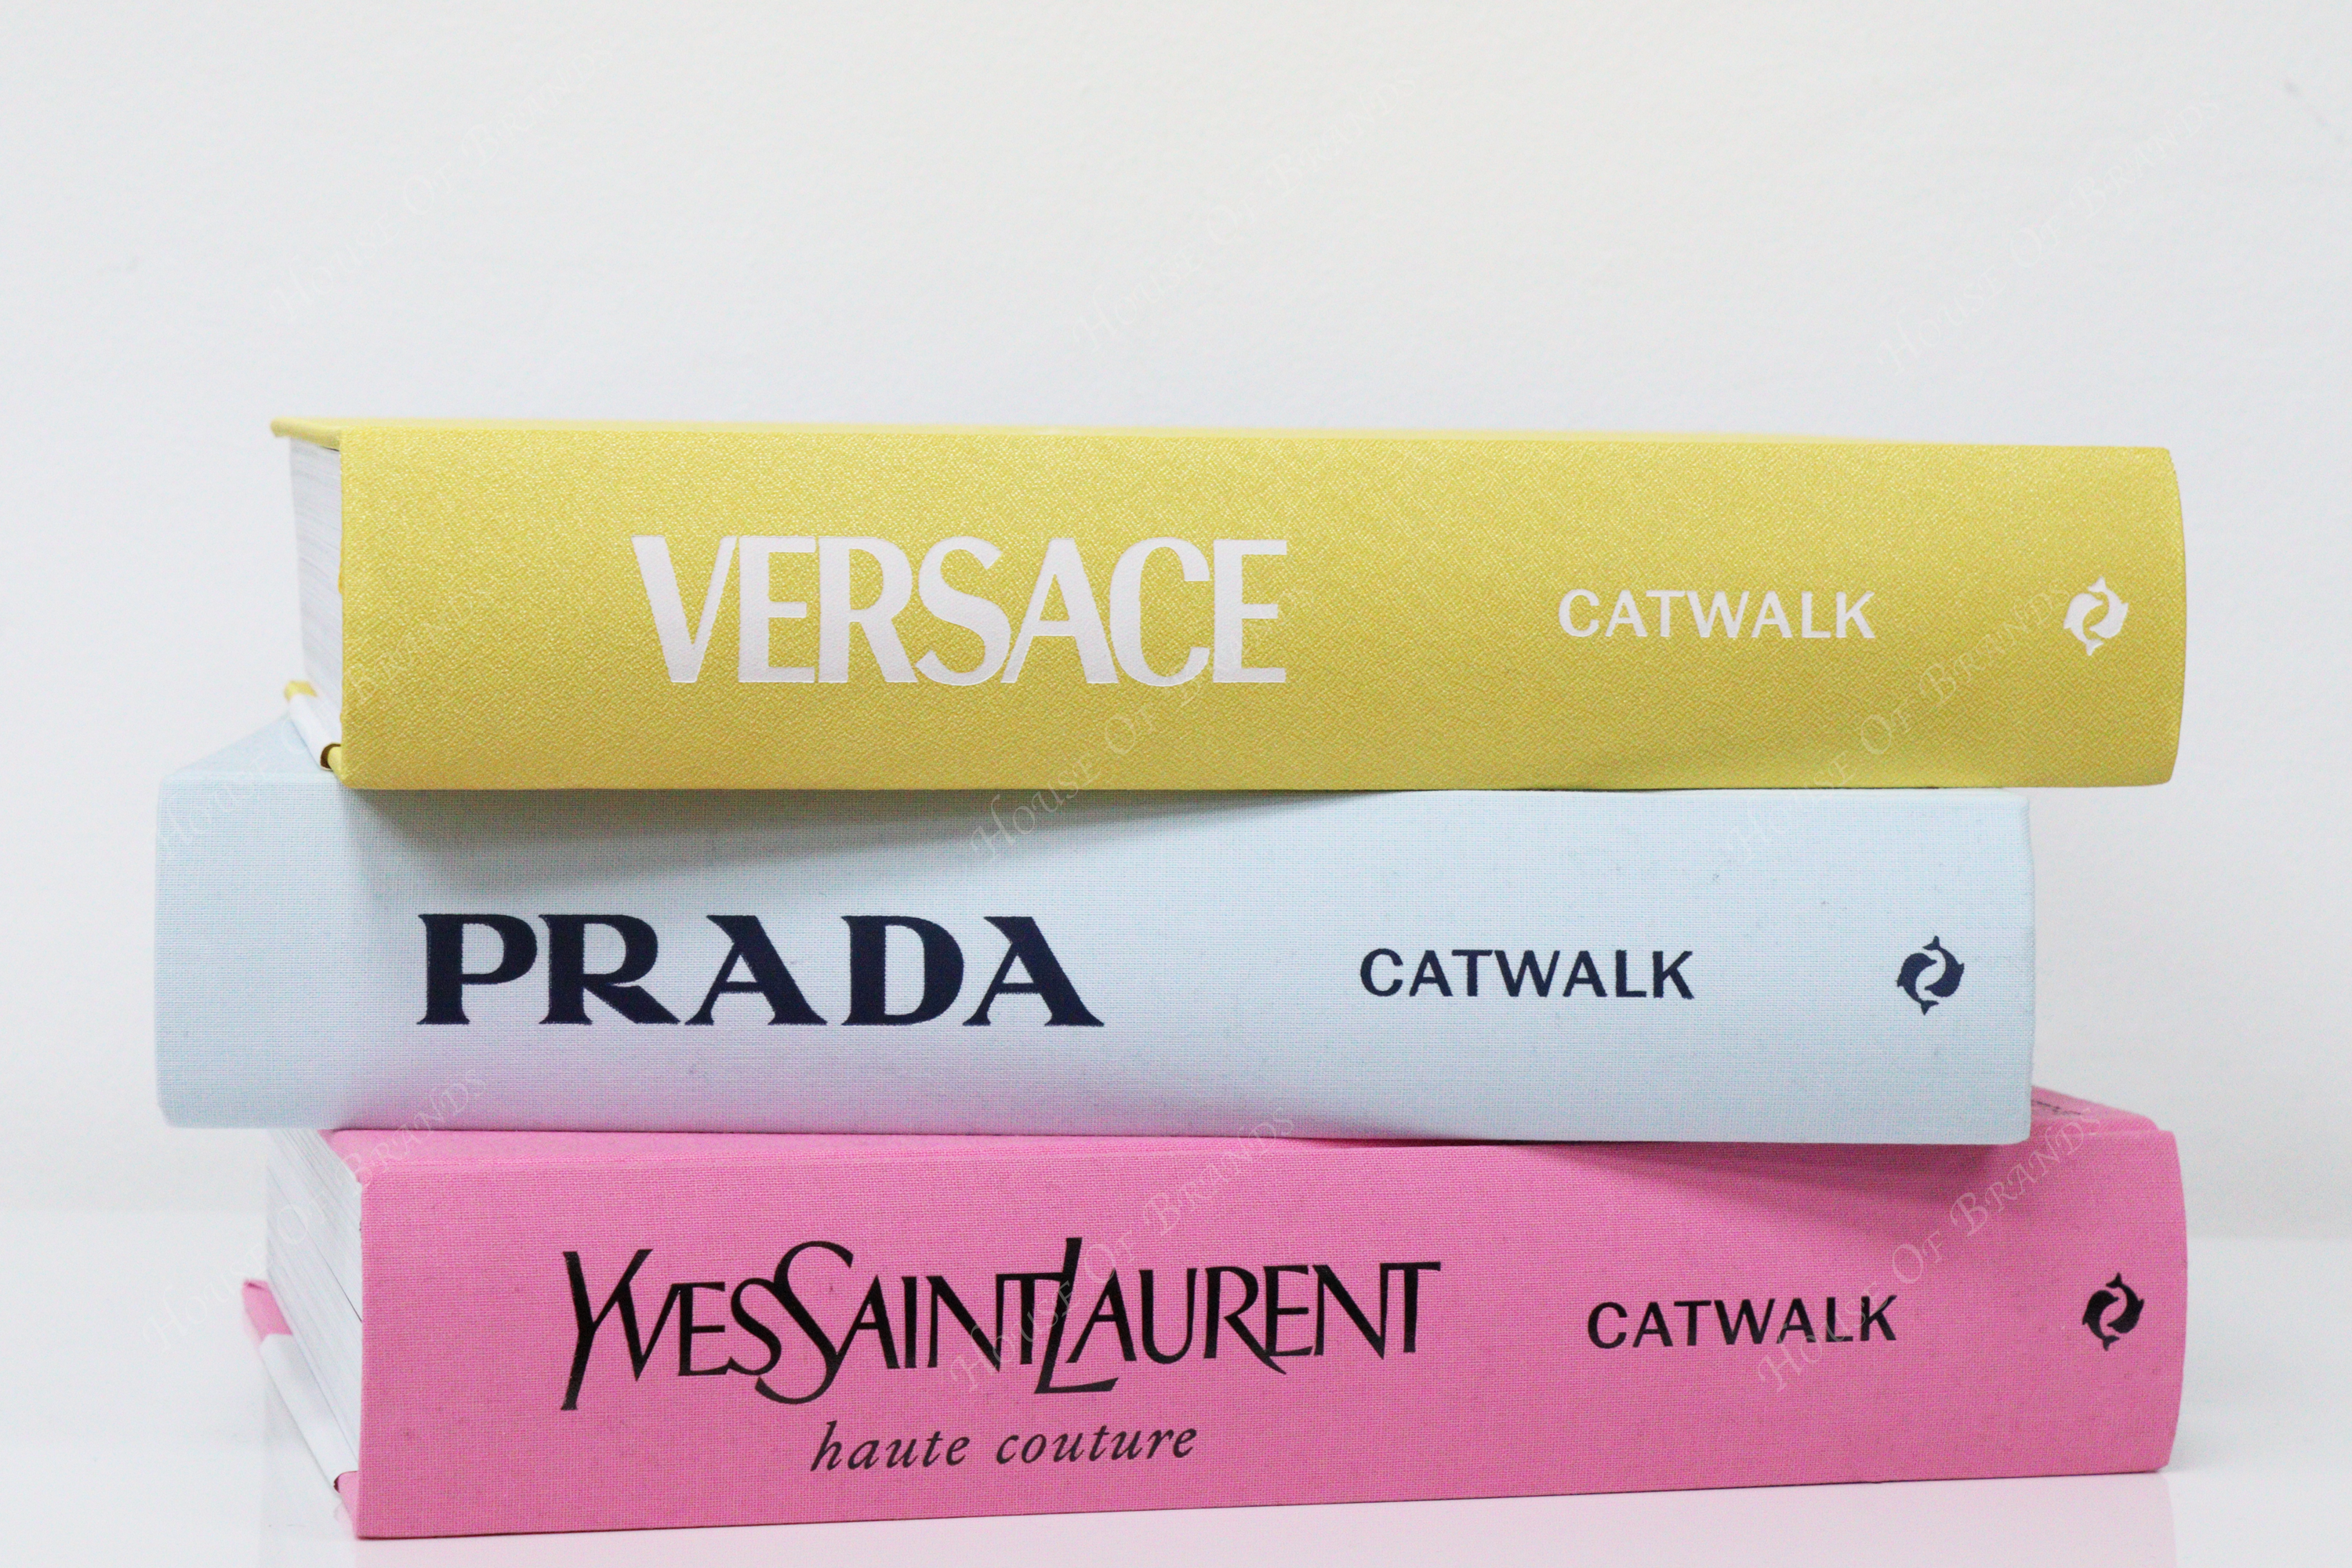 Catwalk Book Collection by Thames & Hudson - Dimensiva